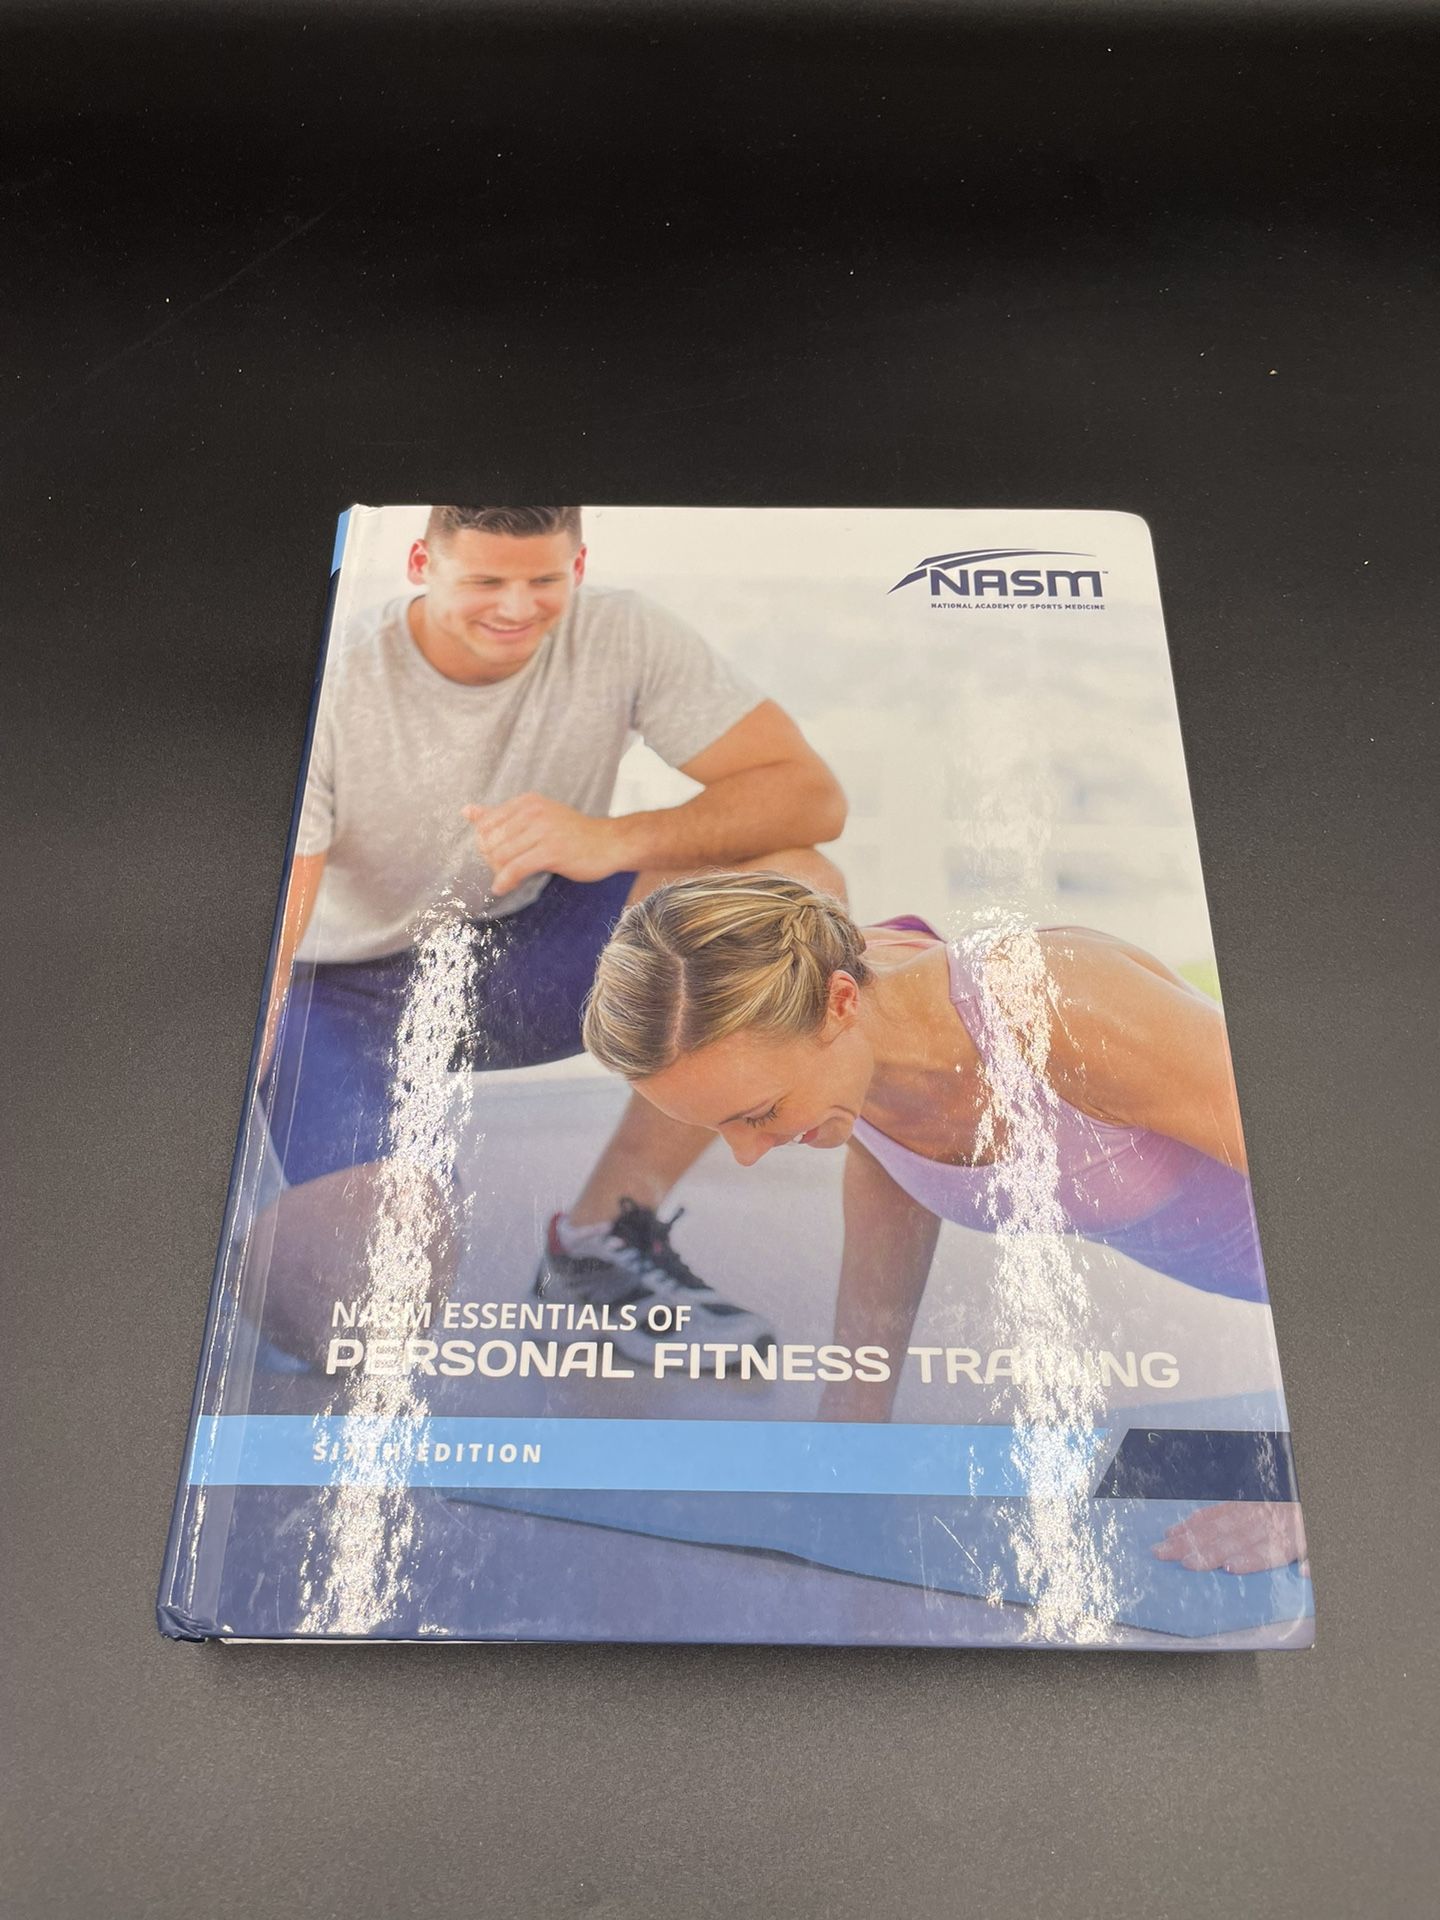 NASM Essentials of personal fitness training sixth edition Book